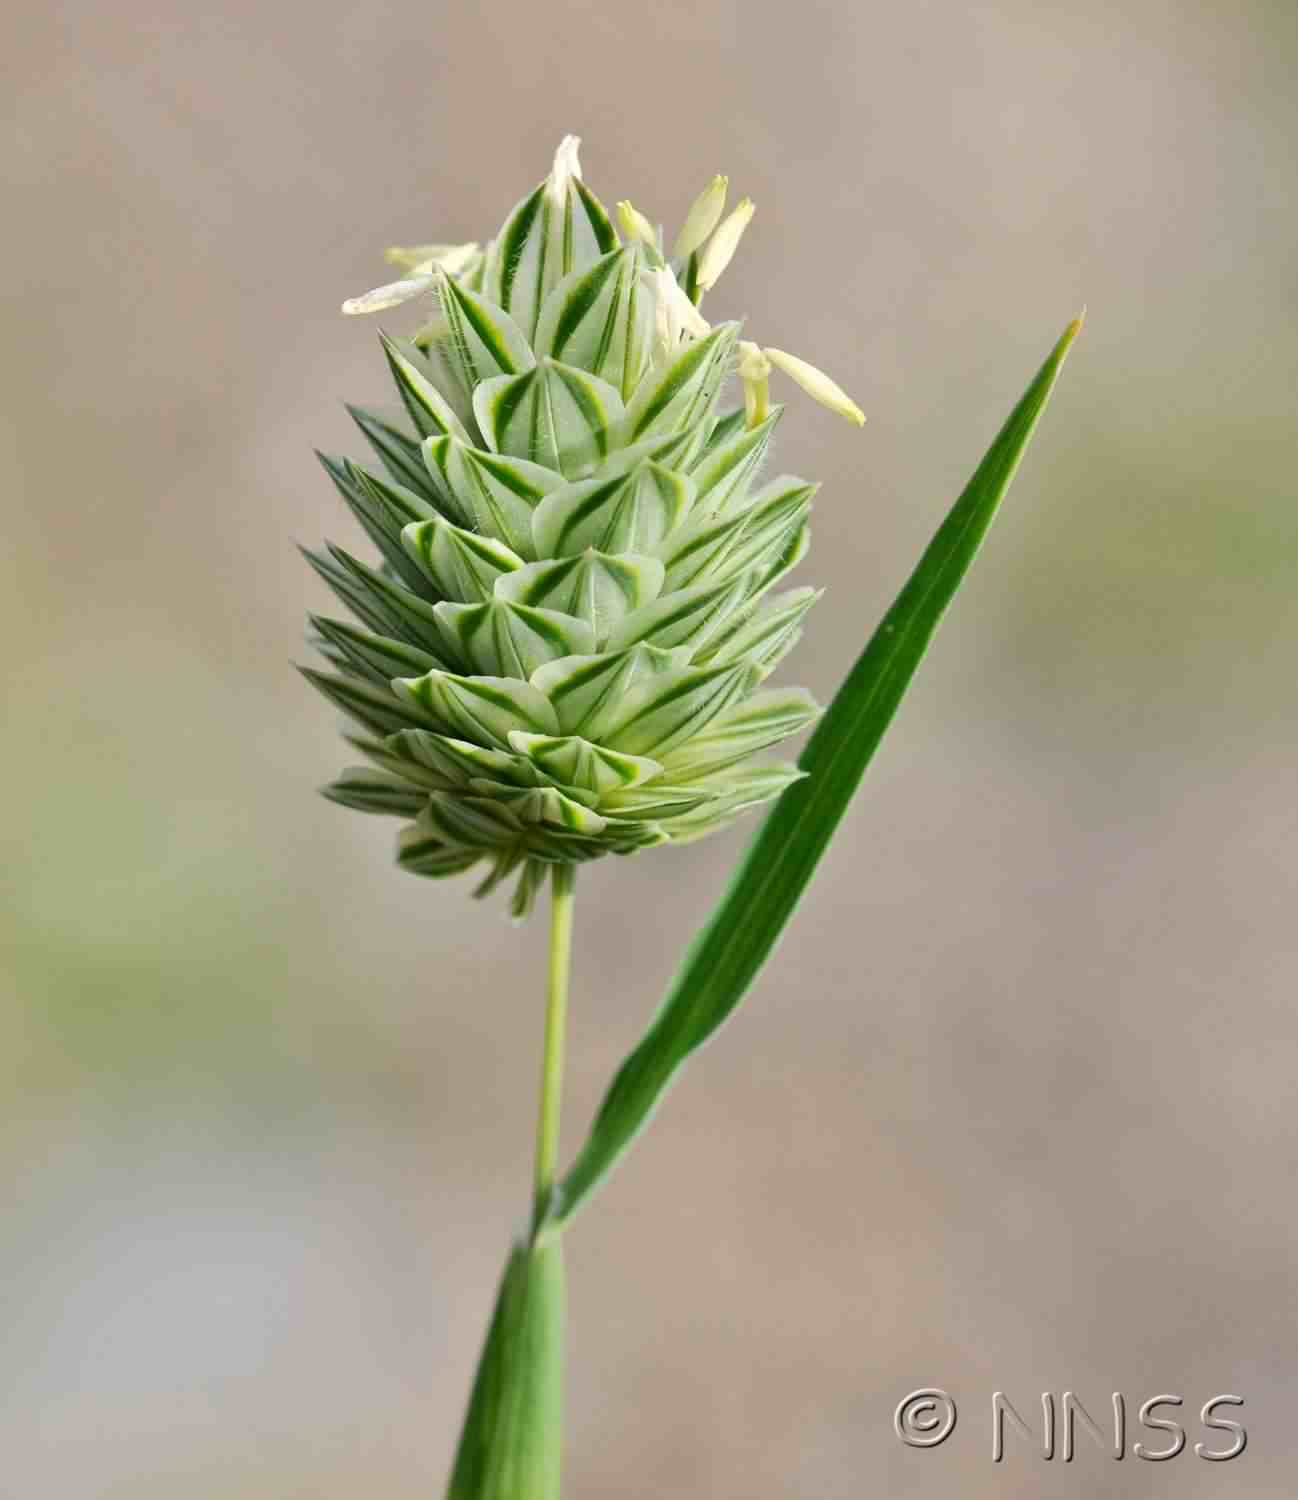 Canary grass - Phalaris canariensis, click for a larger image